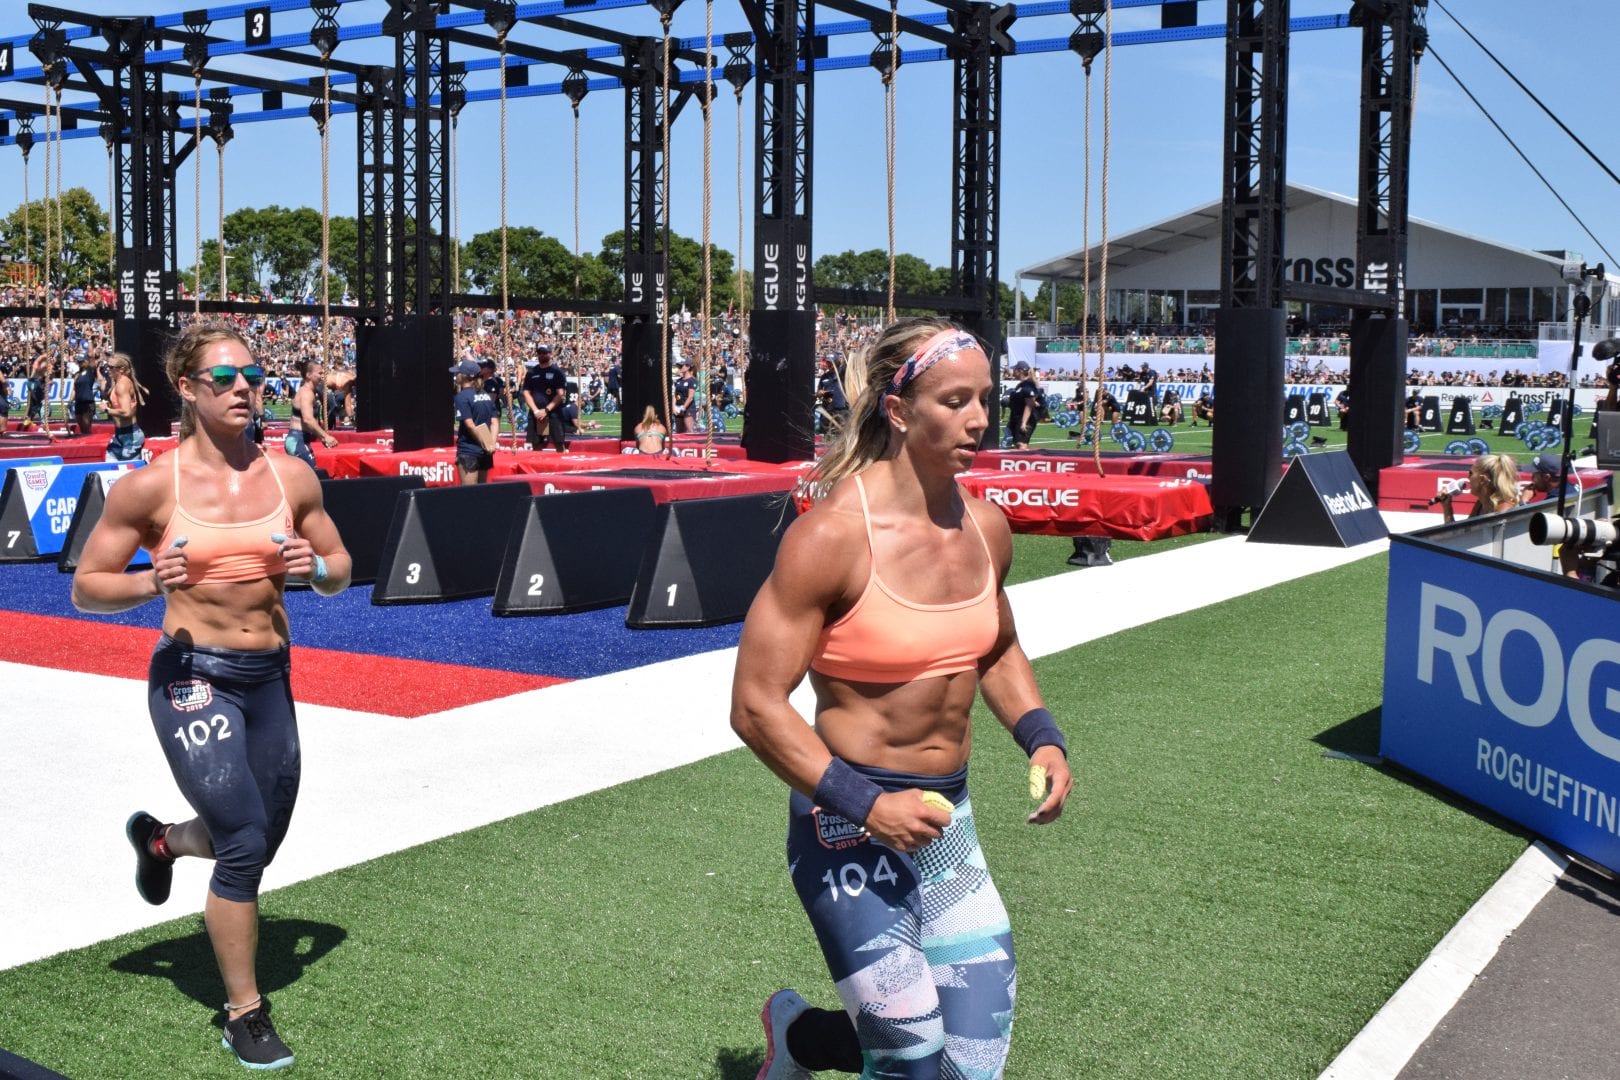 Amanda Barnhart heads out for a run before another round of legless rope climbs at the 2019 CrossFit Games